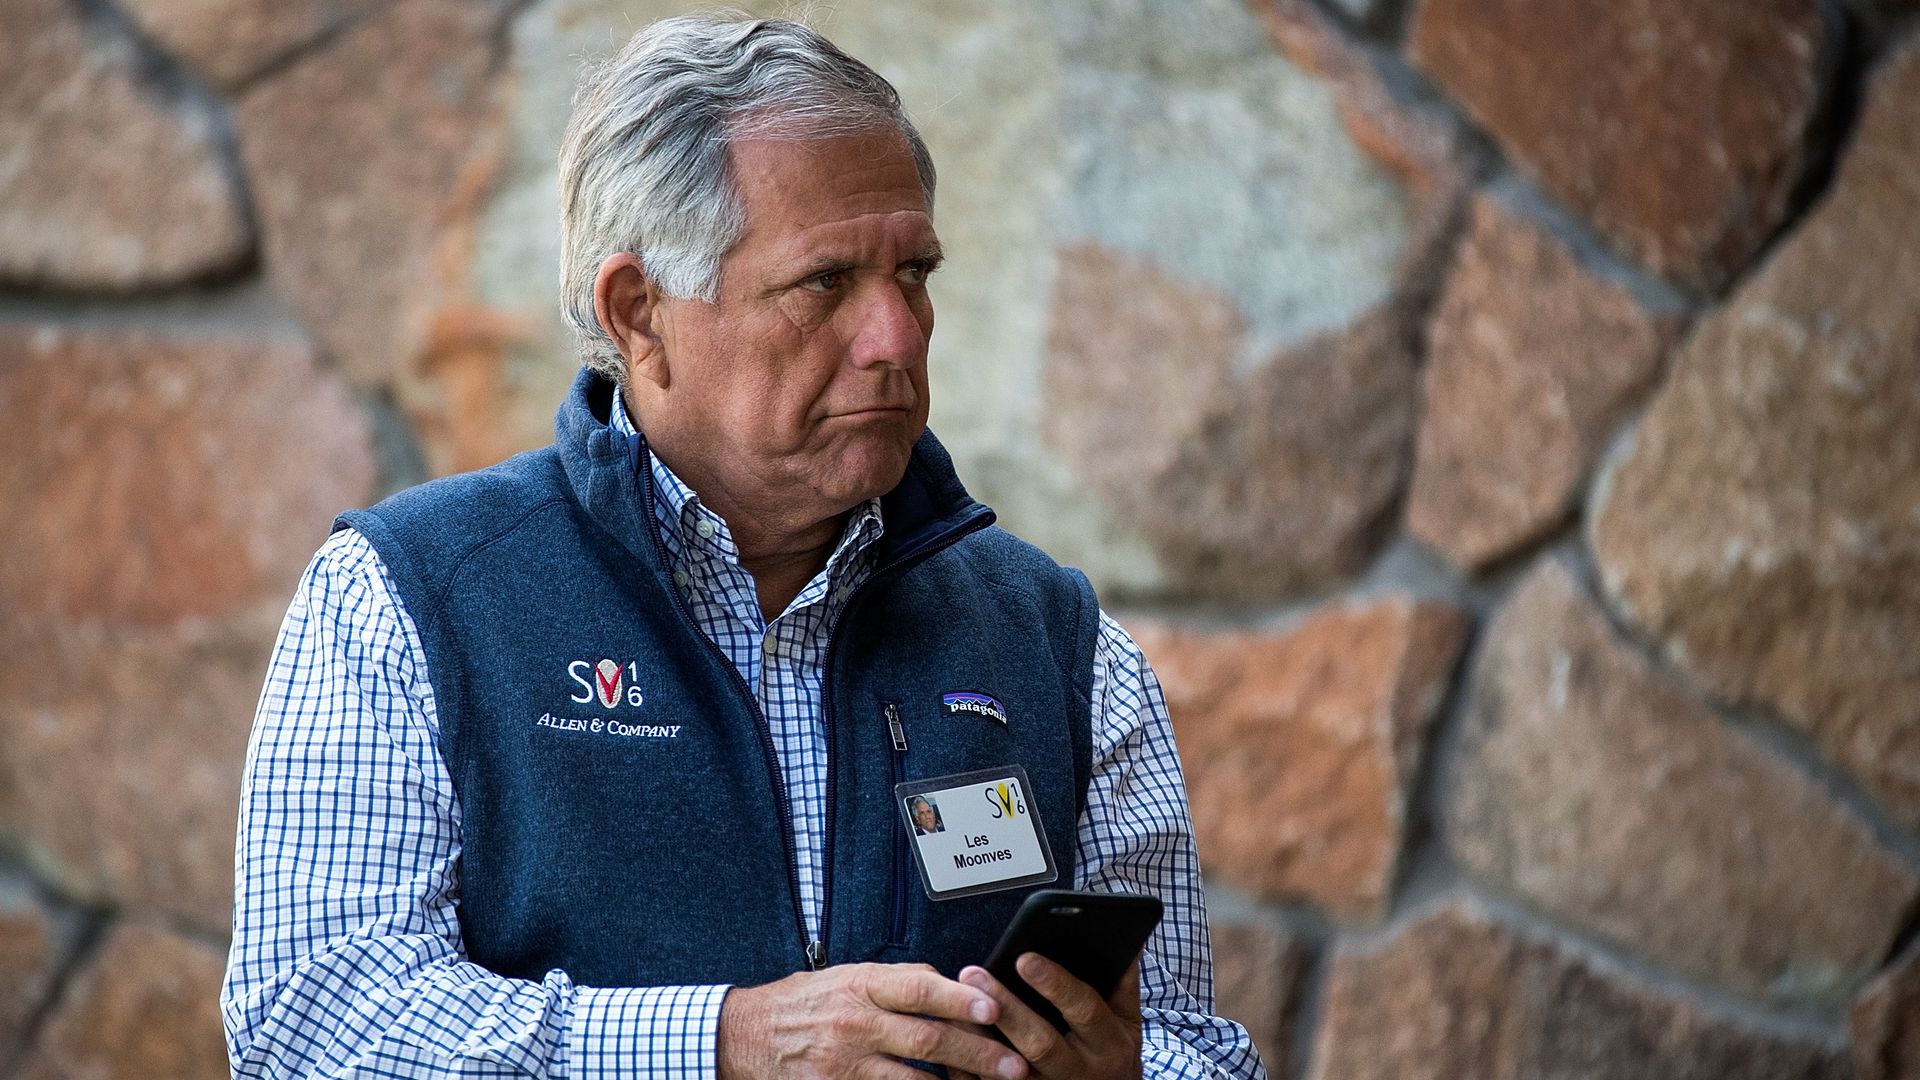 LEslie mOonves former ceo of CBS in a vest